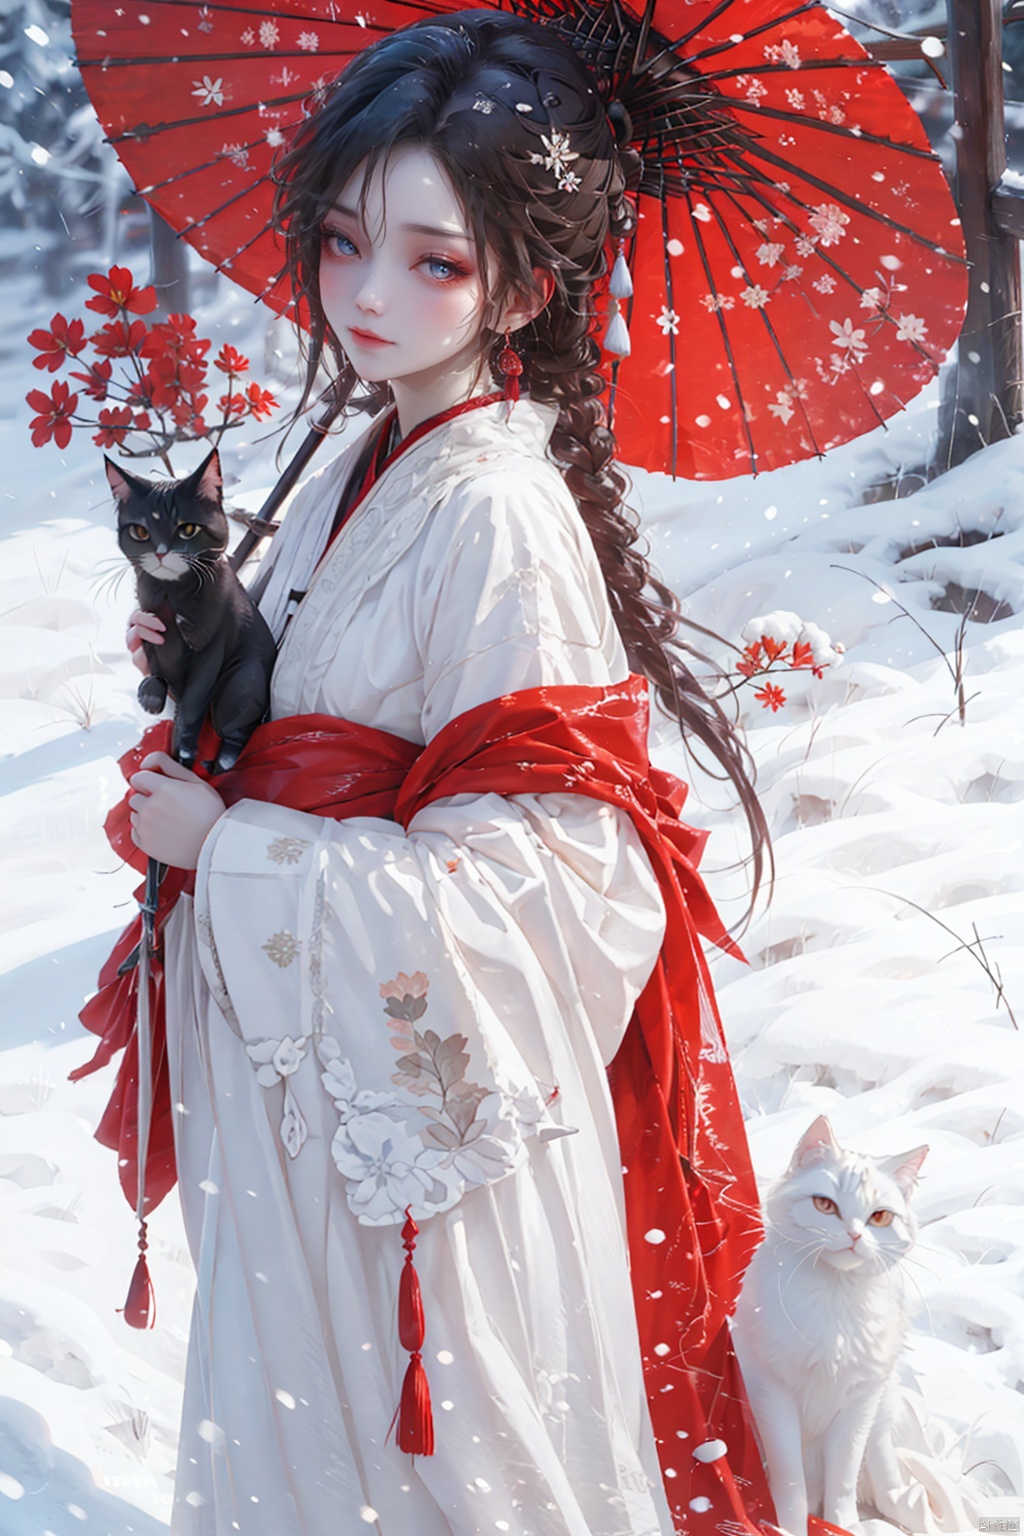  Chinese style, ancient, girl, holding a white cat, red umbrella, Hanfu, snow, winter,